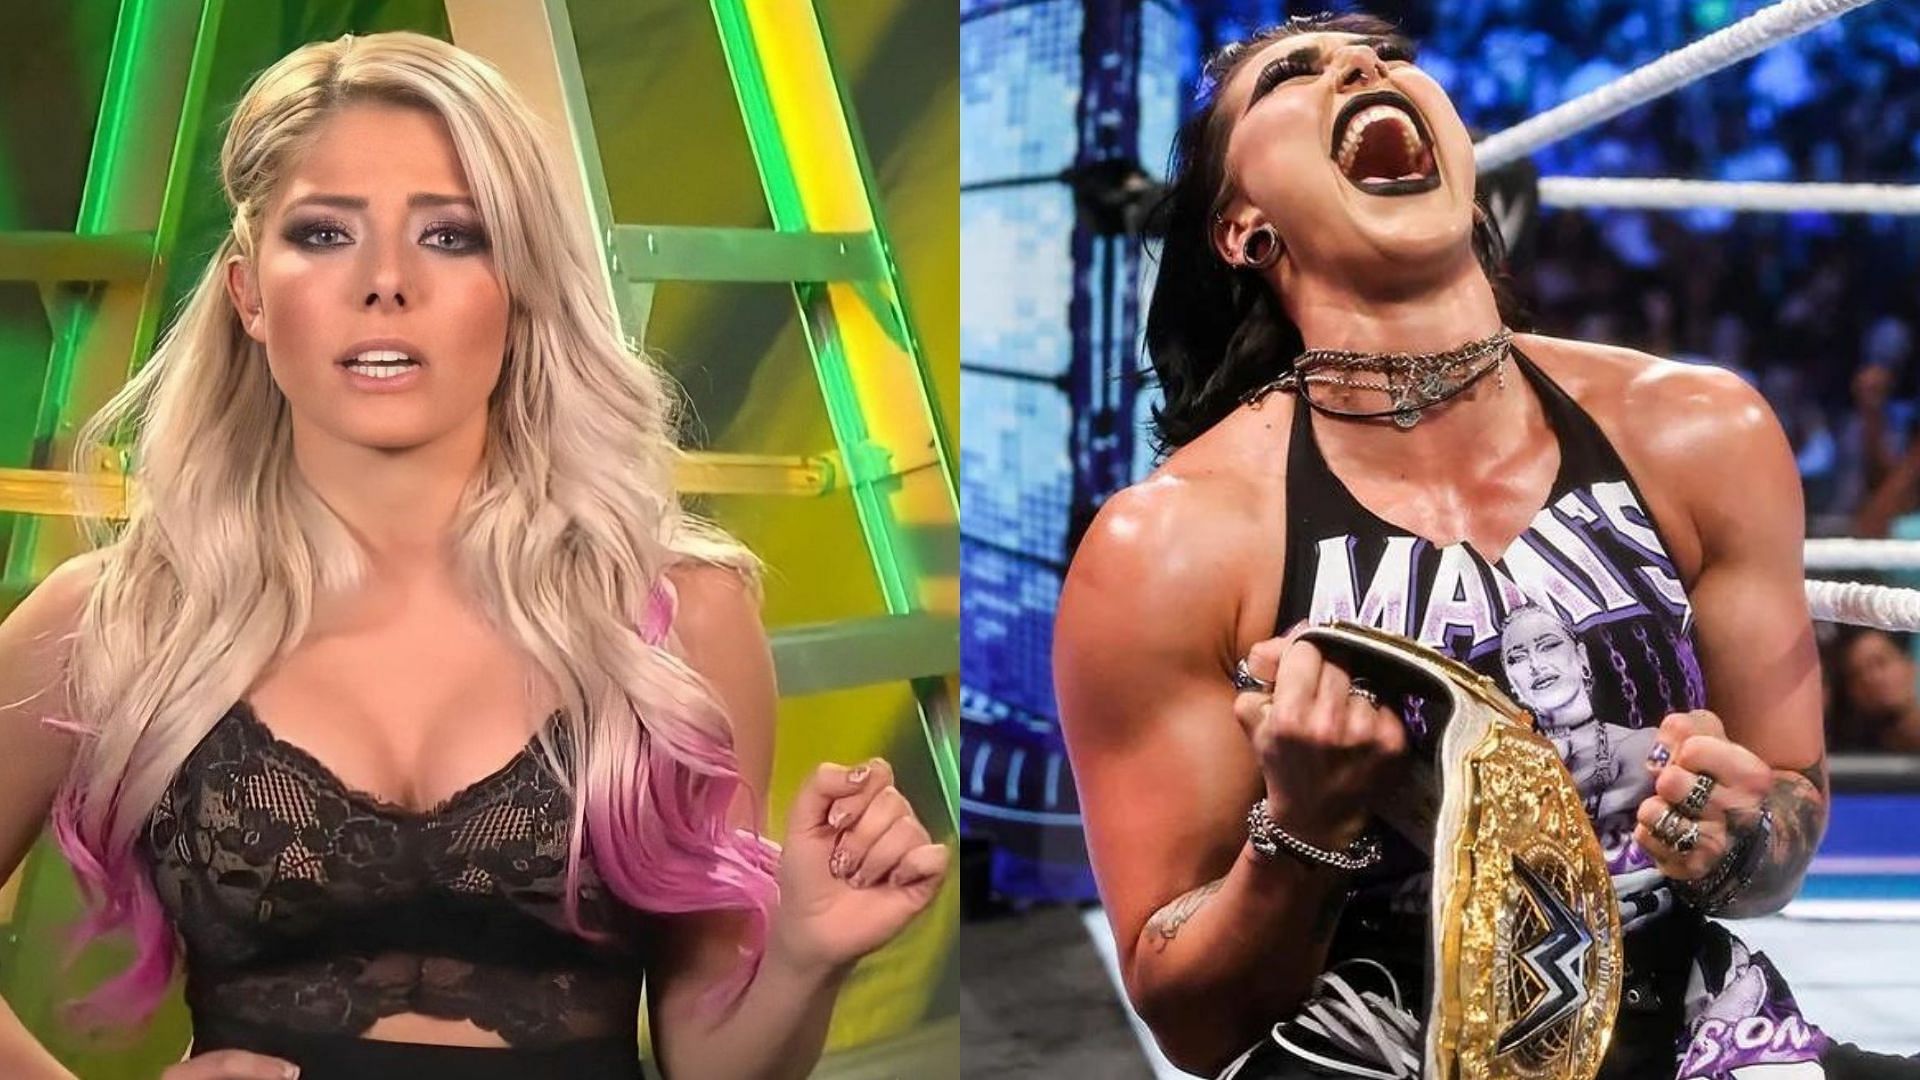 Will Alexa Bliss join Rhea Ripley on the main roster?